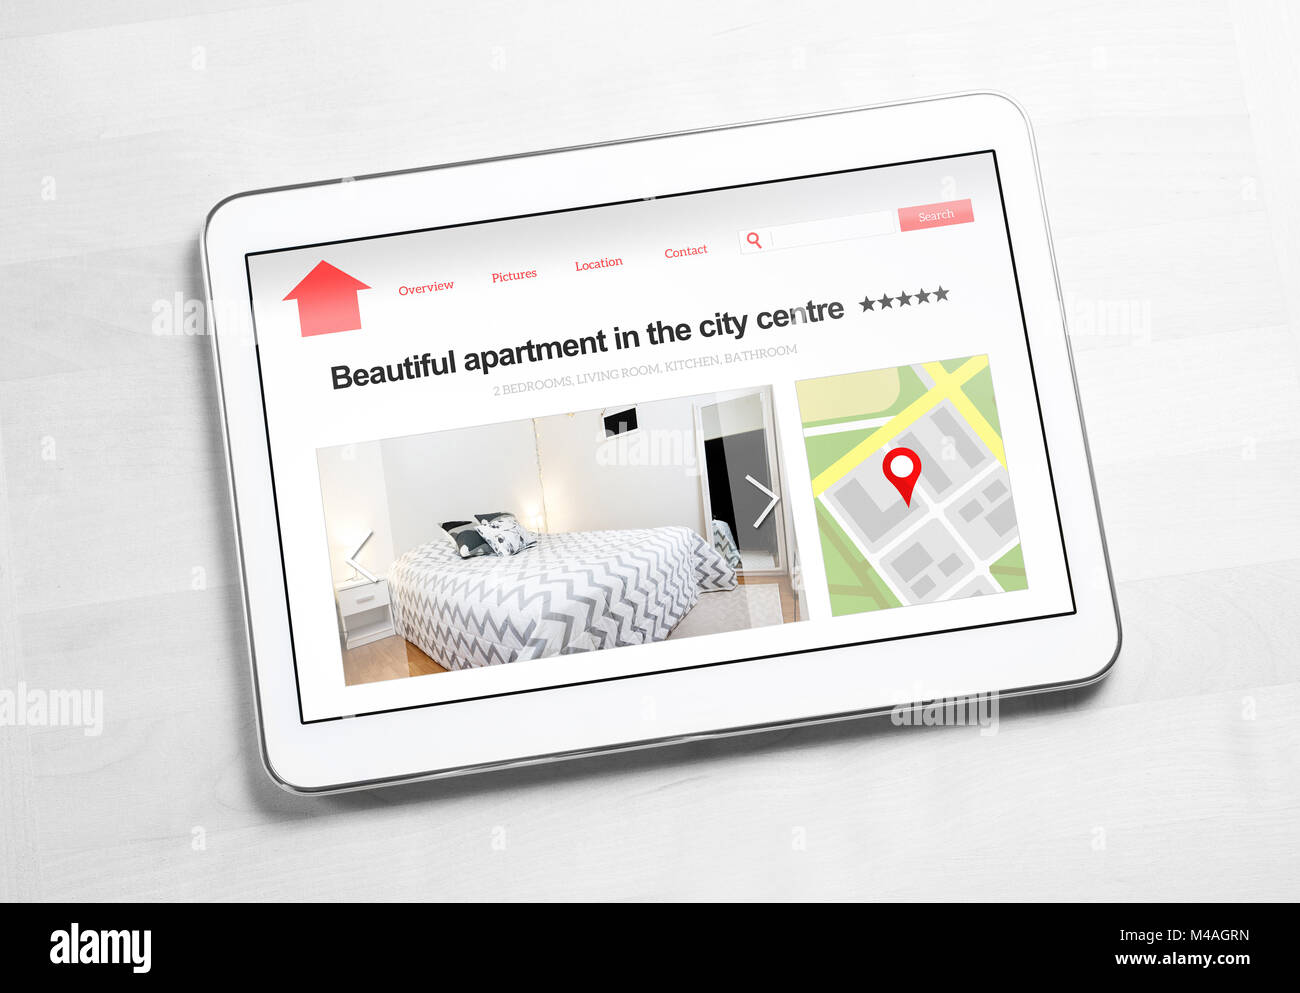 Apartments and houses online search with mobile device. Holiday home rental or real estate website or application. Imaginary internet marketplace. Stock Photo